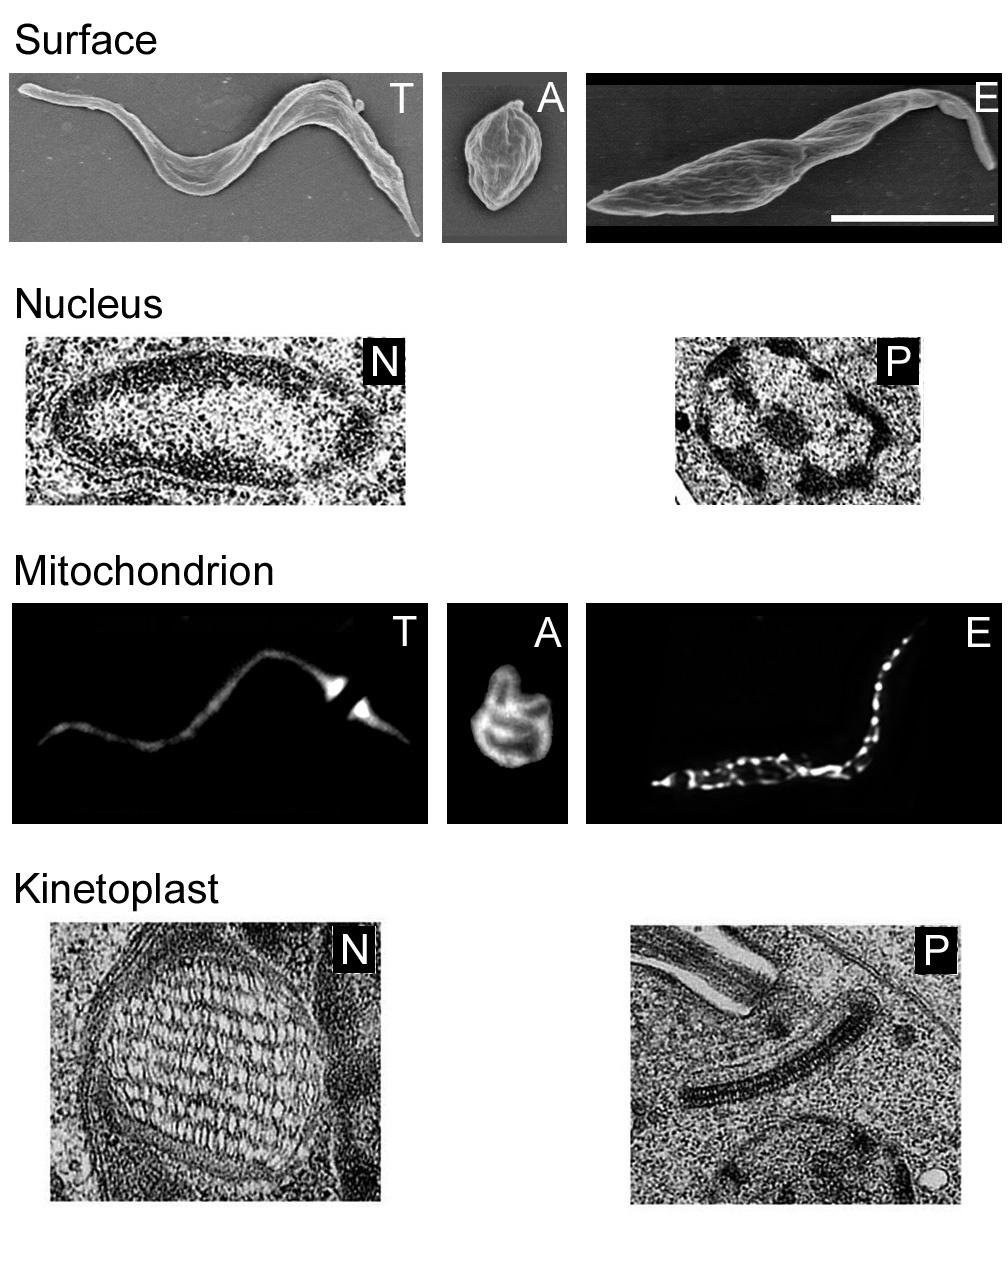 6 Tyler et al. Figure 3. Coordinate changes in morphology and organellar structure during the life cycle. Surface.